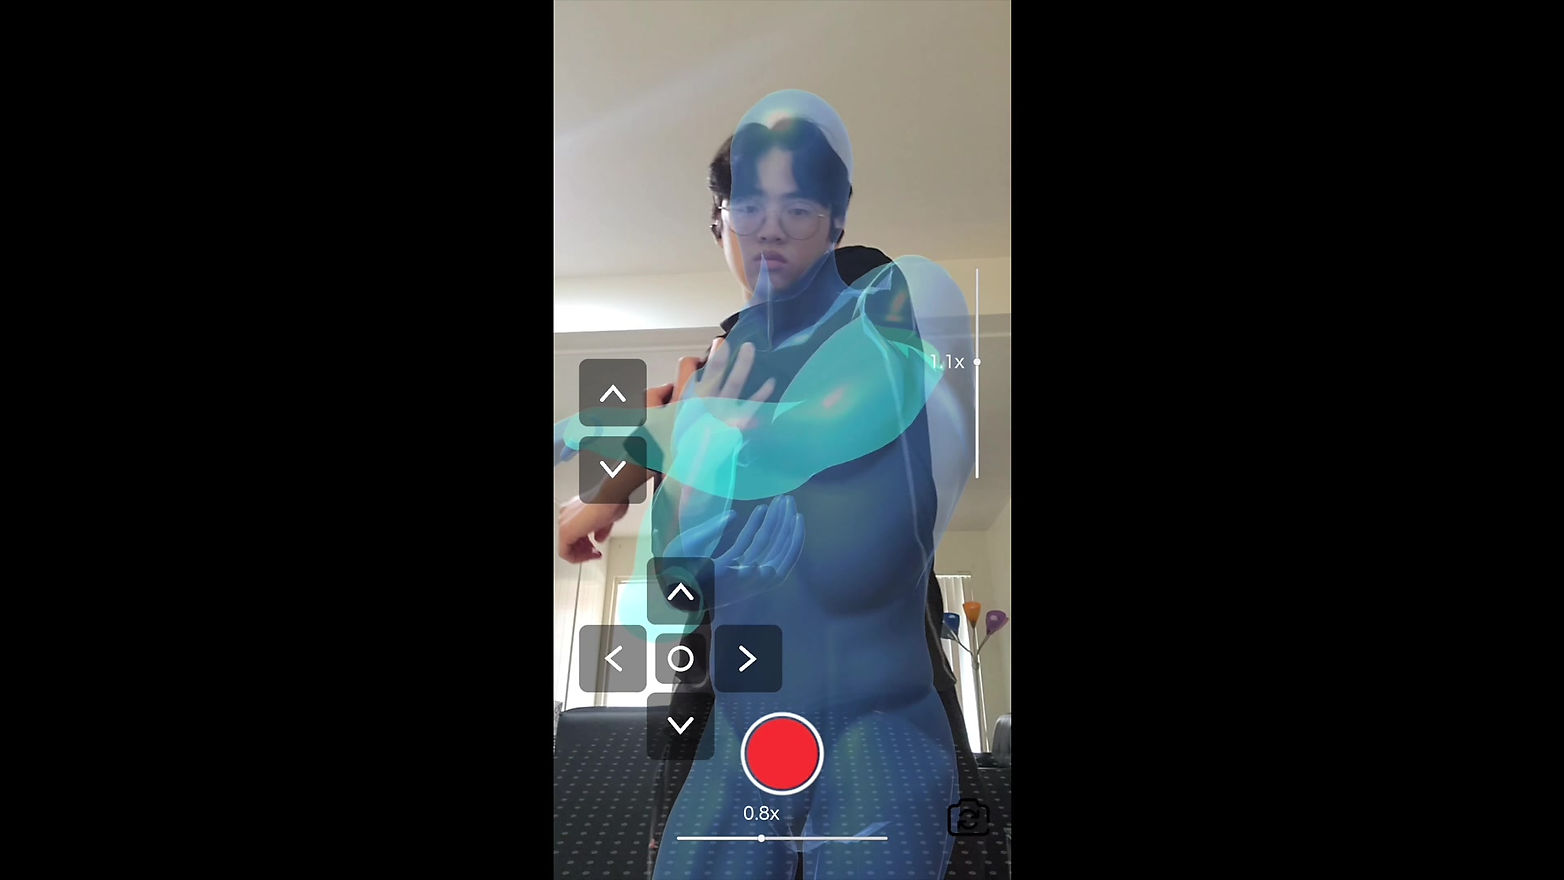 Learn Proper Exercise Form with Move AR